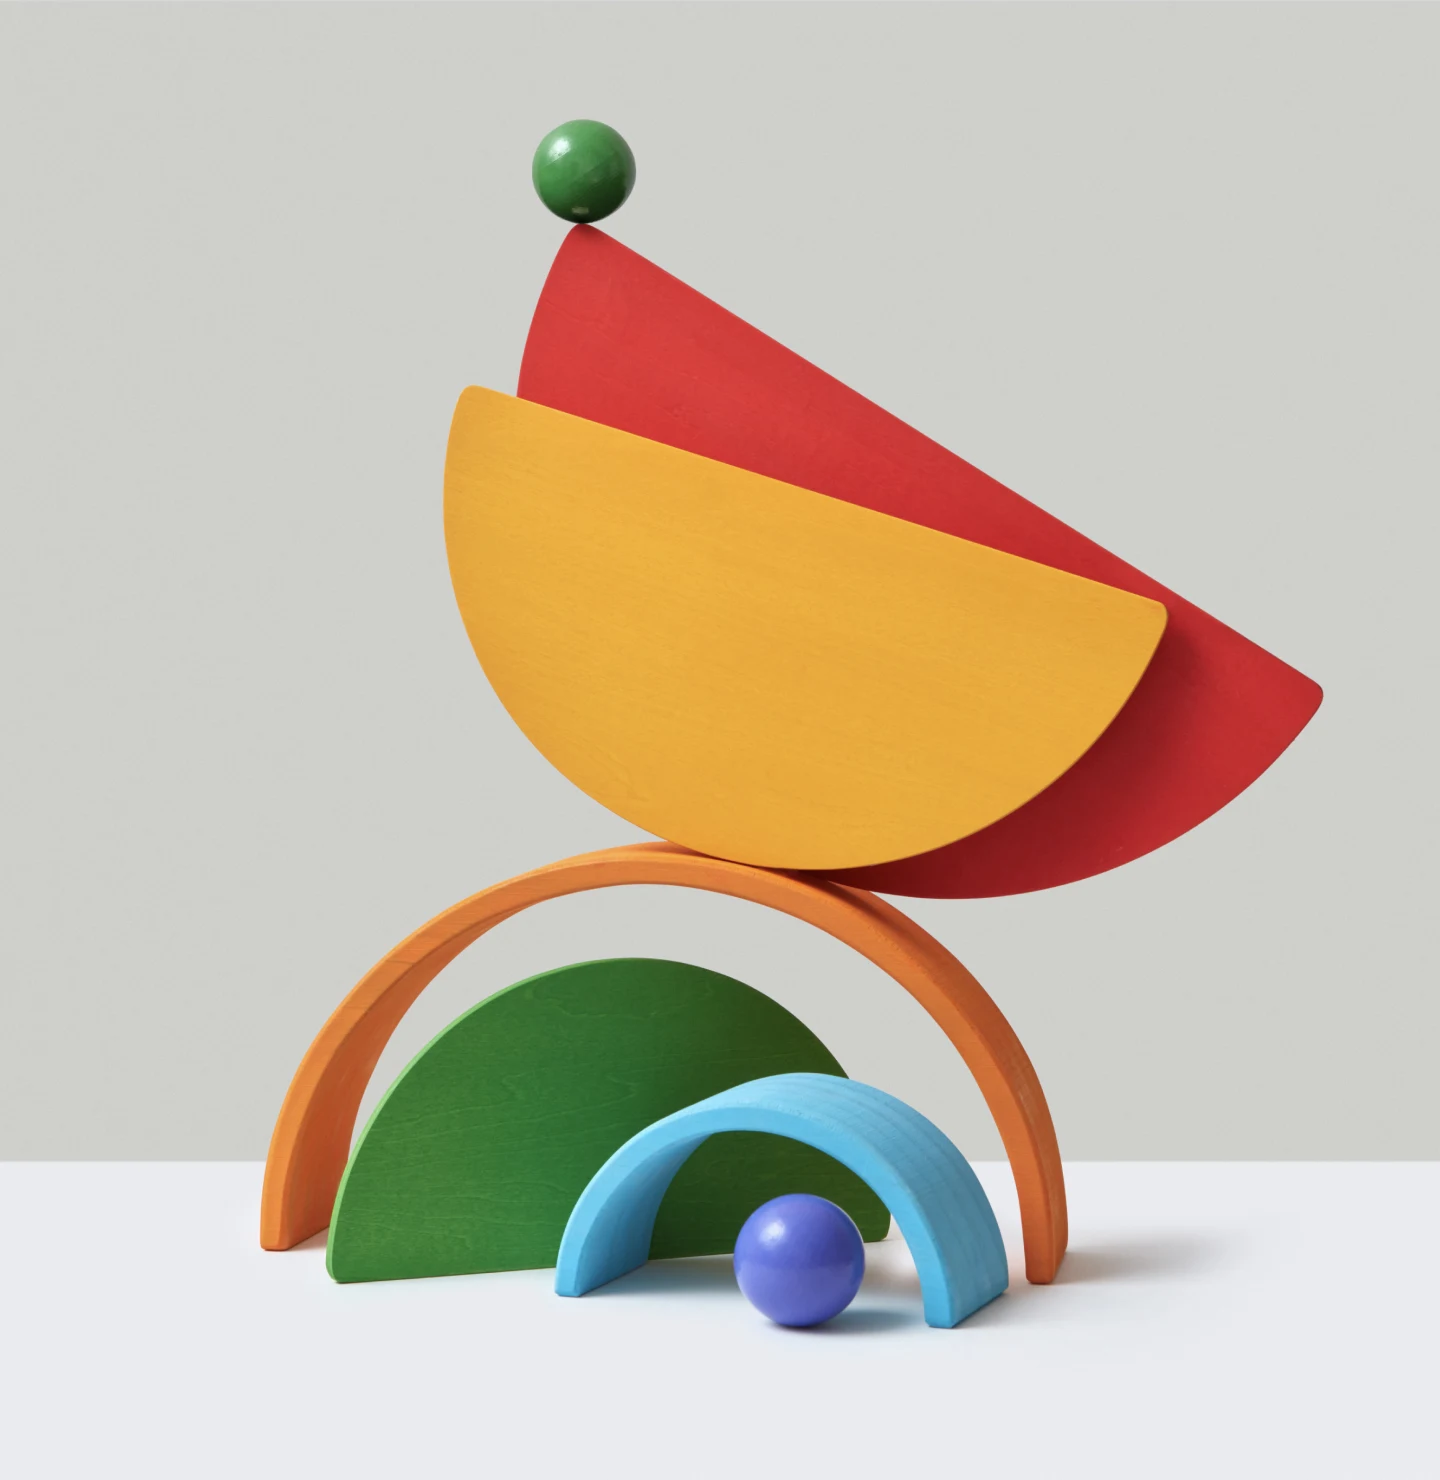 Colorful shapes balanced on top of each other